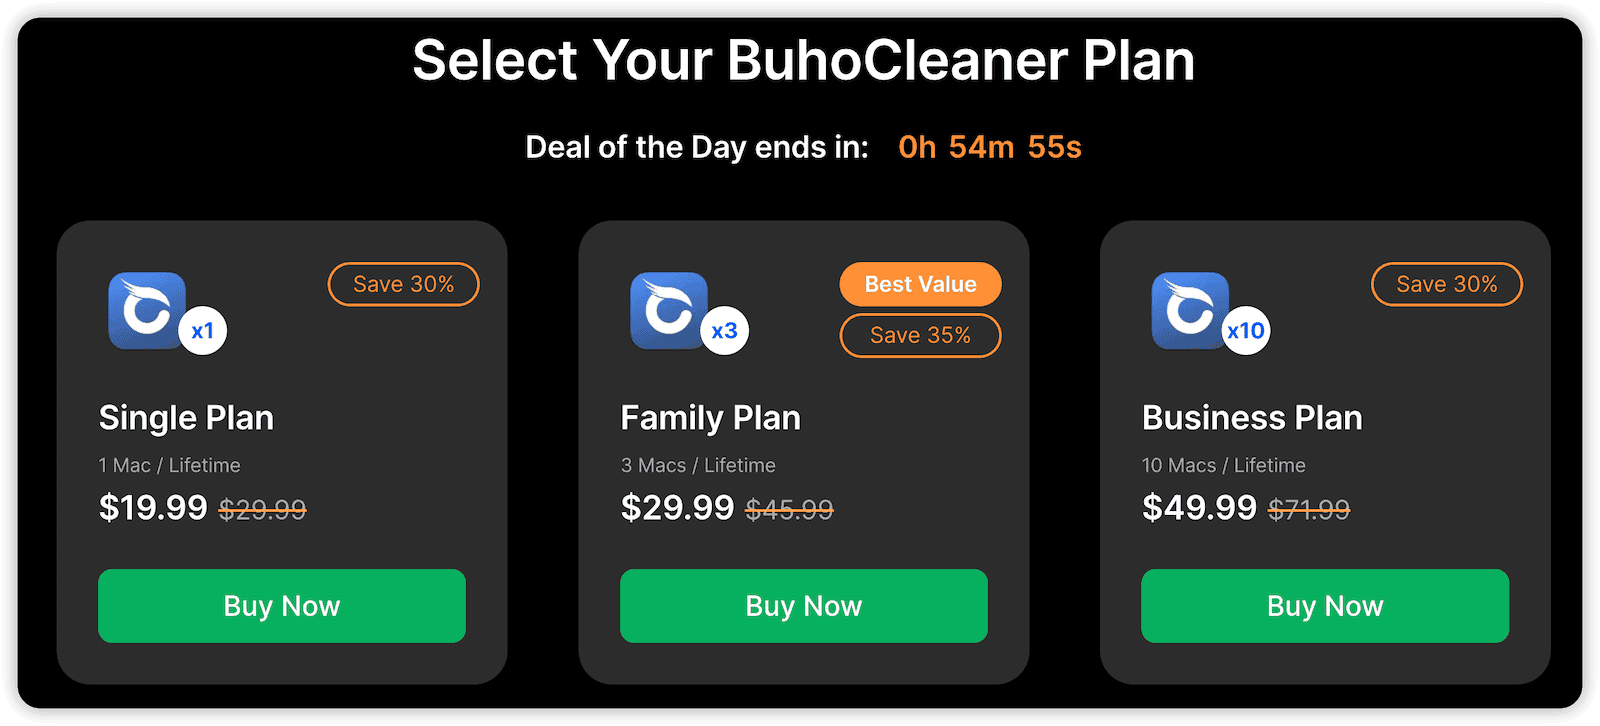 select-your-buhocleaner-plan.png